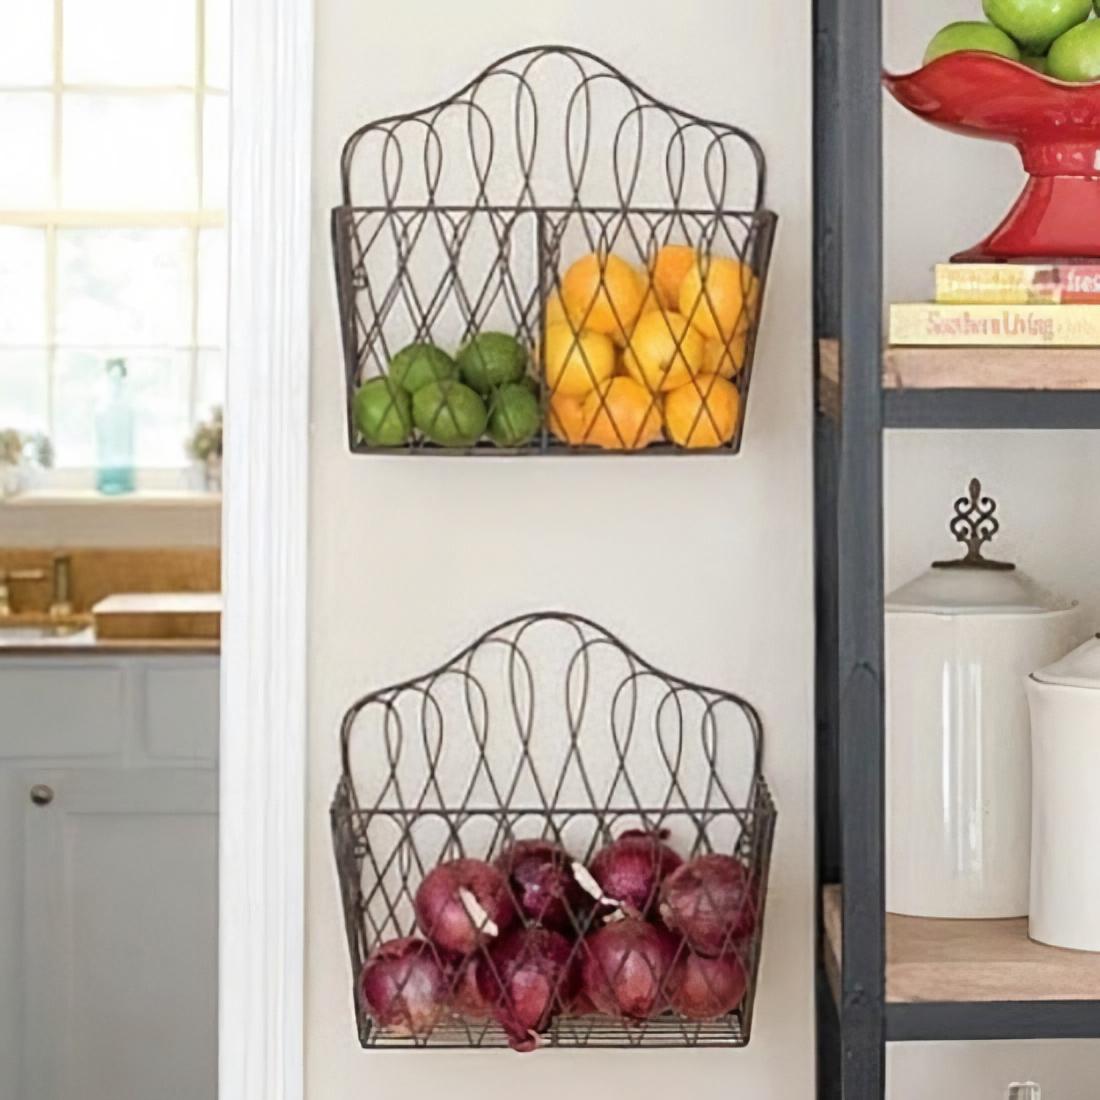 15 Genius DIY Storage Solutions Made From File Holders